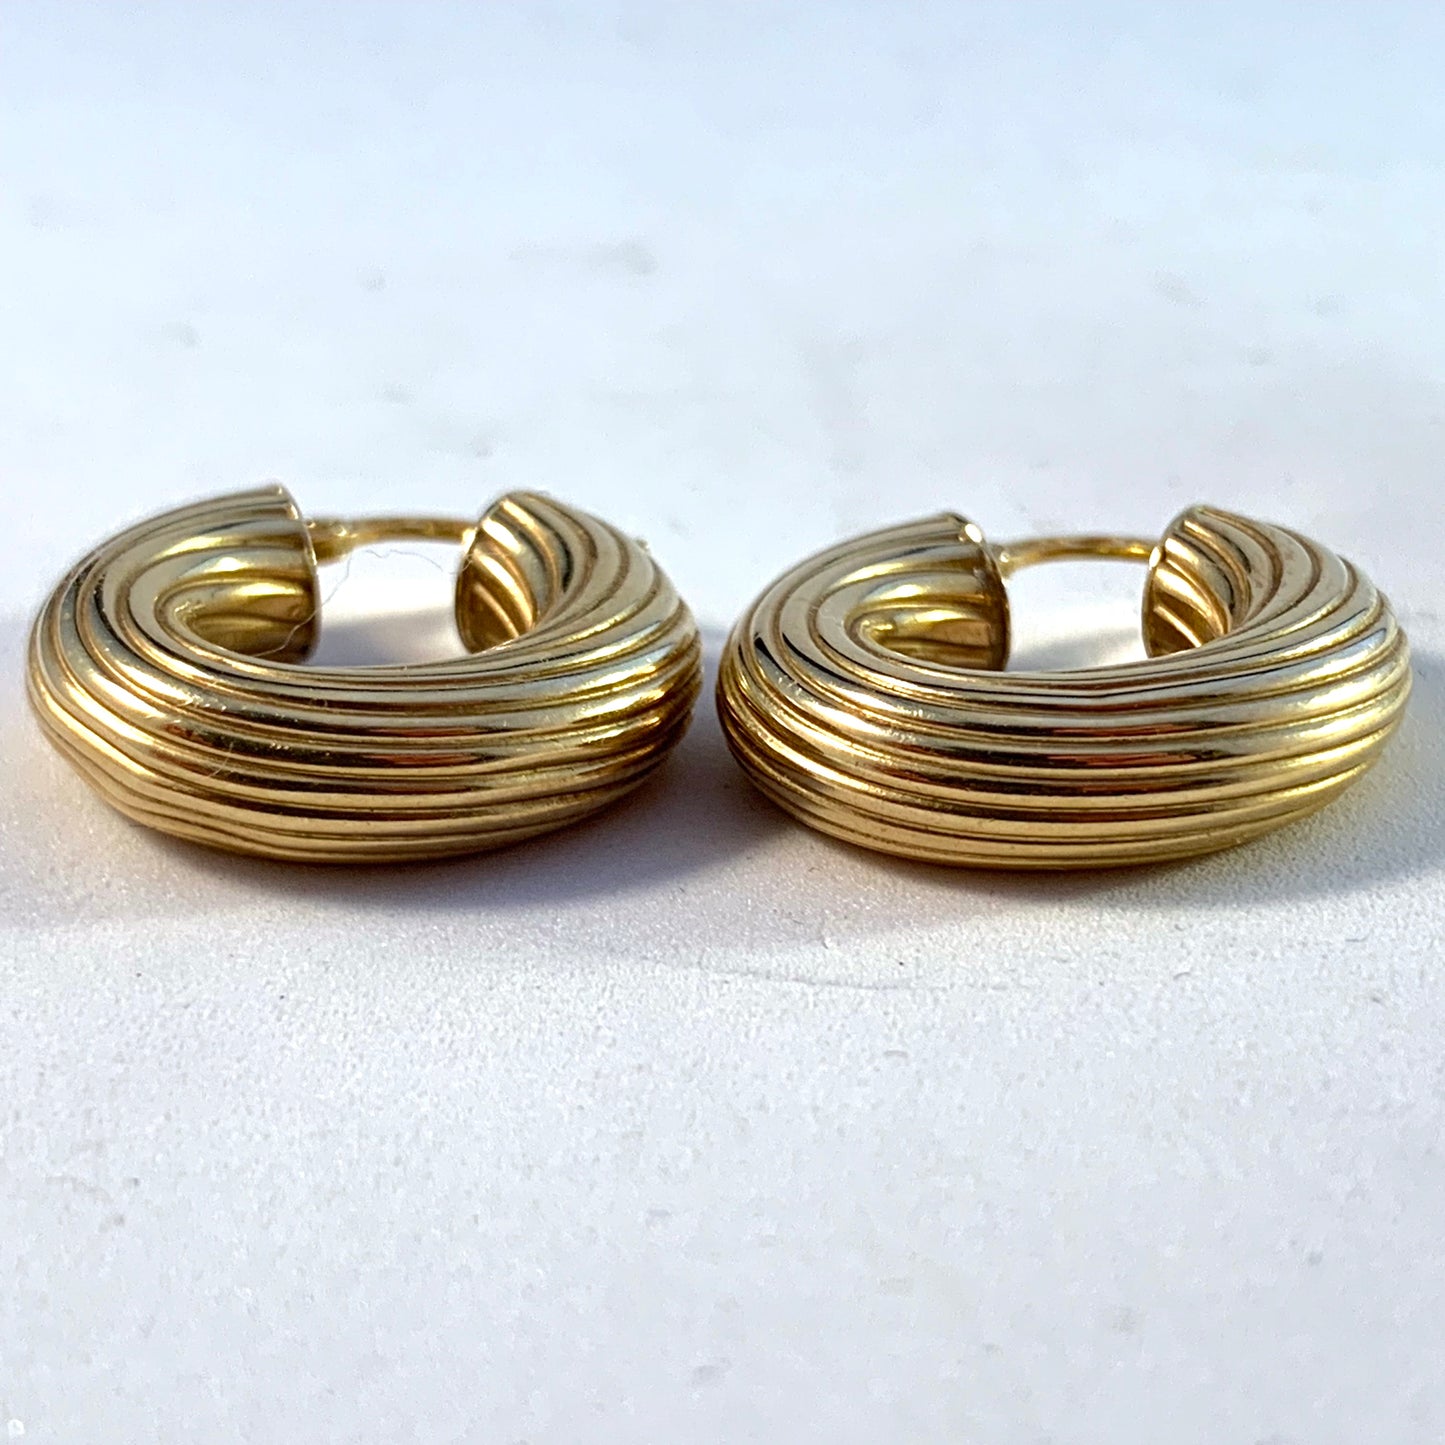 UNO A ERRE, Arezzo, Italy Vintage Large 18k Gold Huggie Earrings.